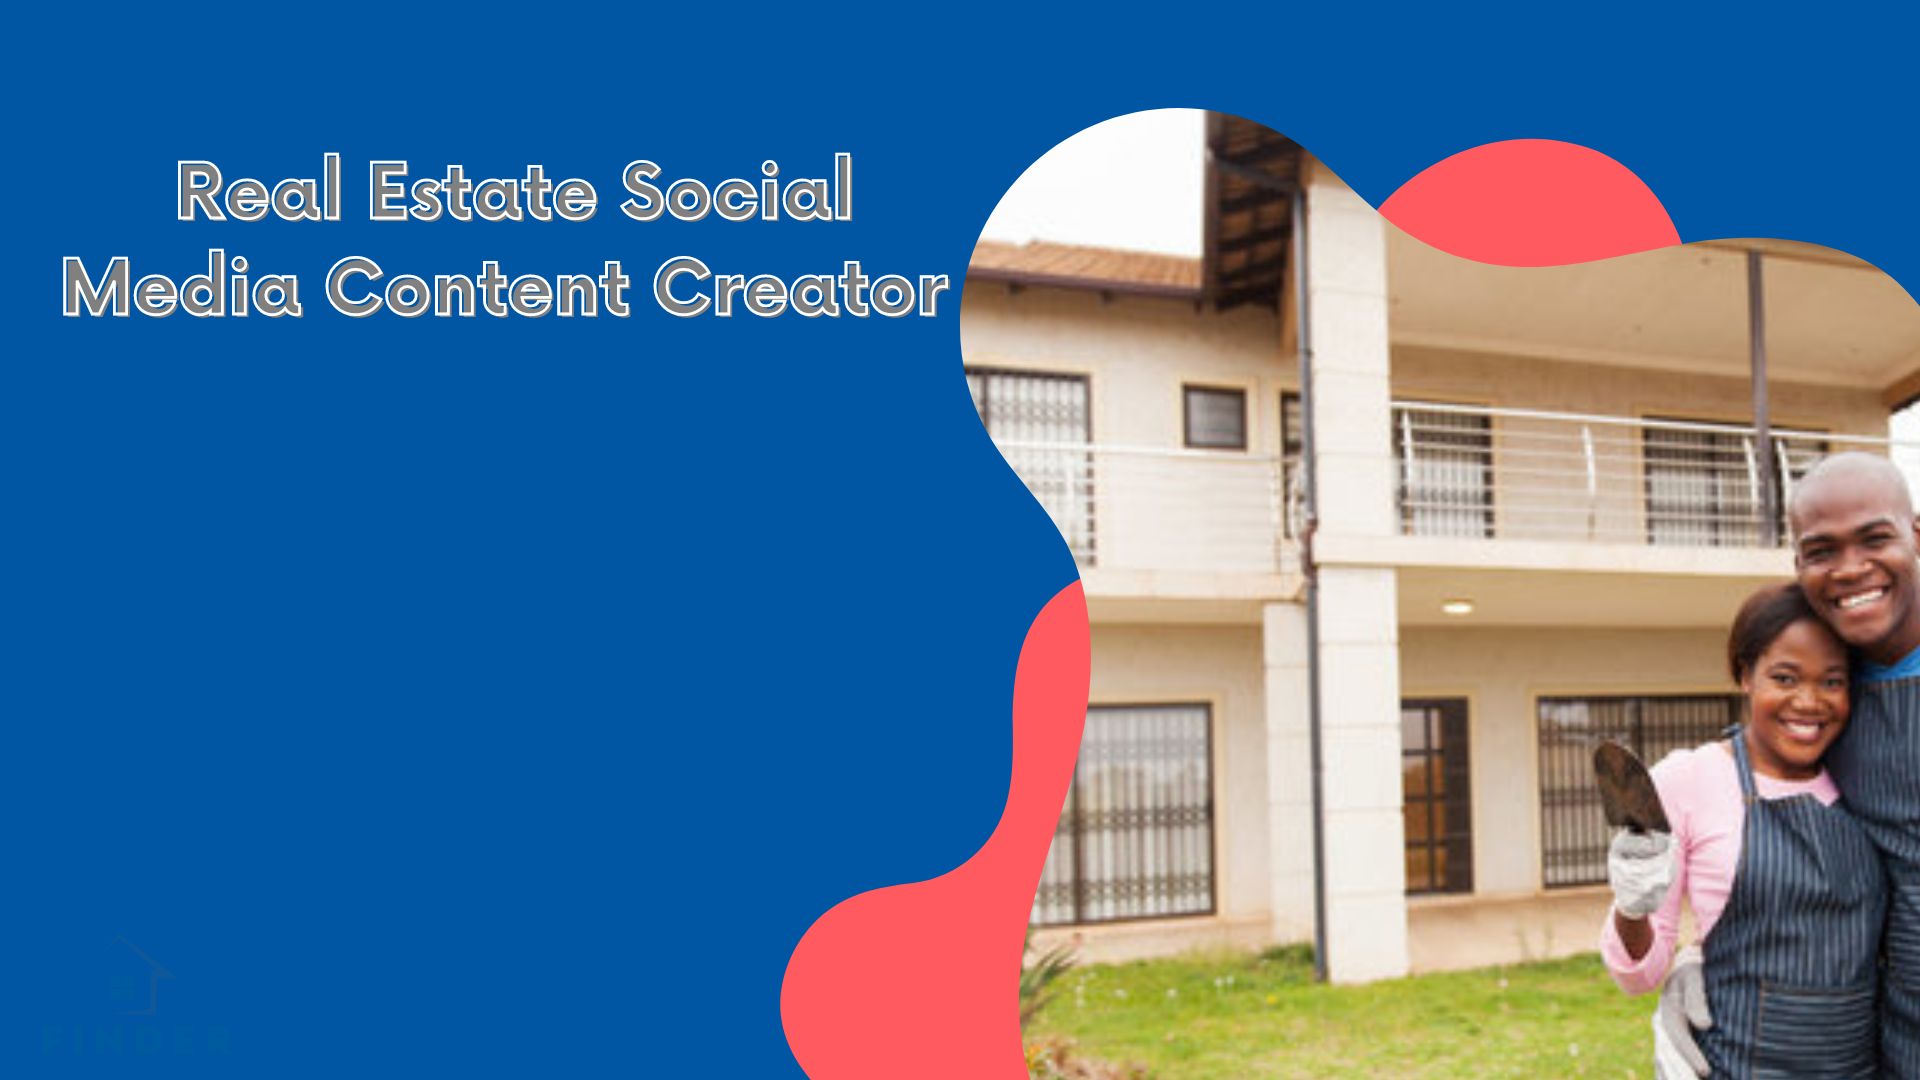 A real estate social media content creator can be a valuable asset to your real estate brand.